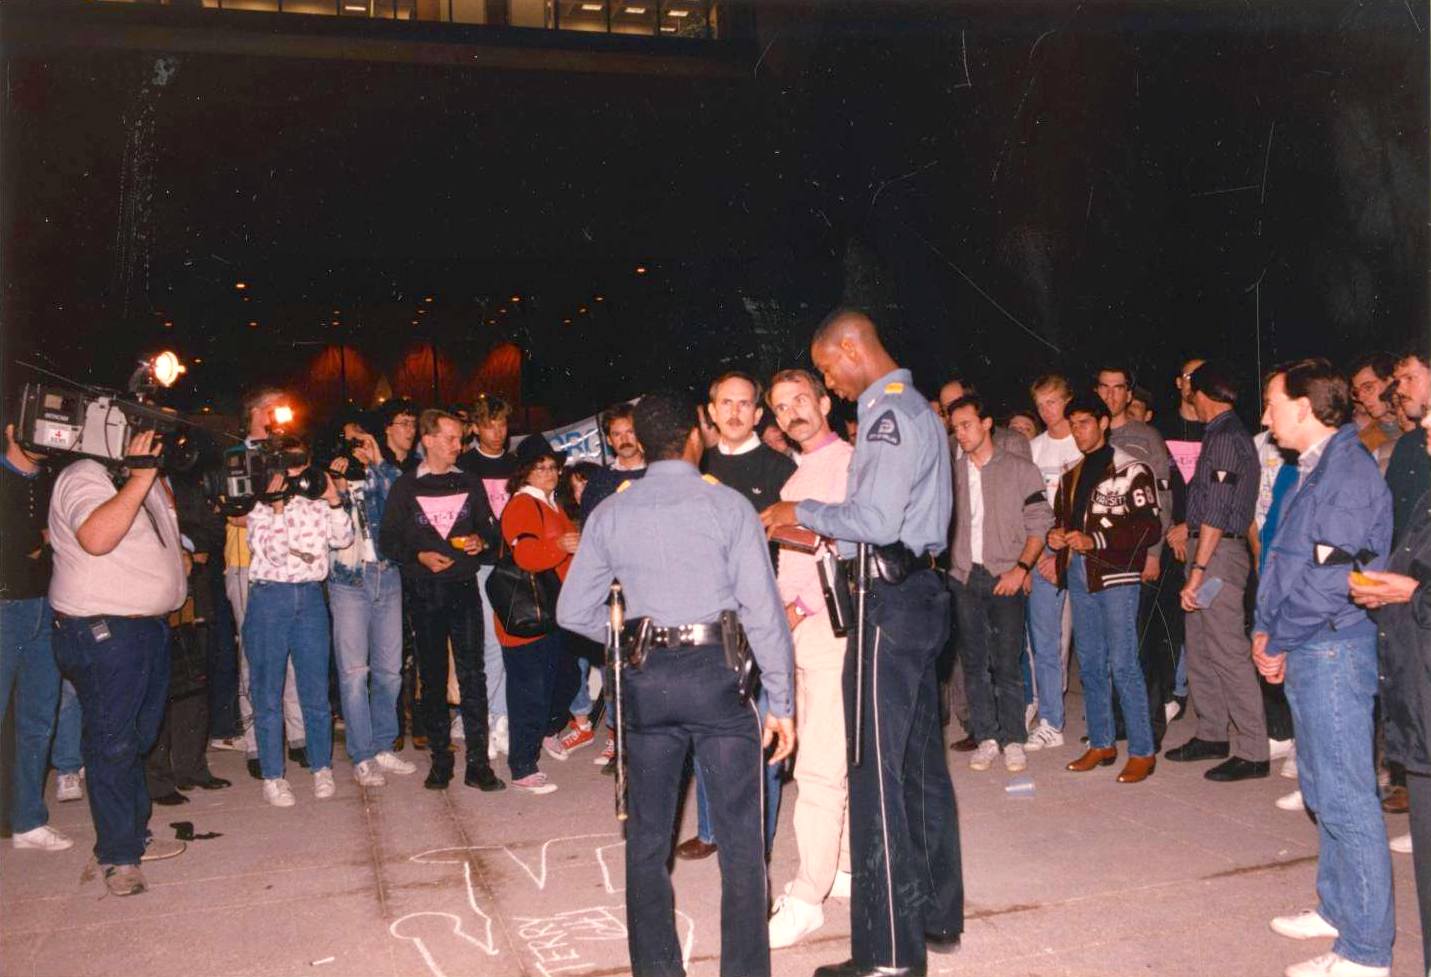 Bill Nelson and William Waybourn speaking with two police officers at the City Hall Plaza memorial for Terry Tebedo after his funeral earlier that day, Dallas, TX, January 28th, 1988. They are standing next to a chalk outline of a body on the sidewalk that represents Nelson's partner, Terry Tebedo. Written inside the chalk outline is the number 641, representing the number of AIDS casualties at the time of Tebedo’s death in 1988. Photo courtesy of William Waybourn.